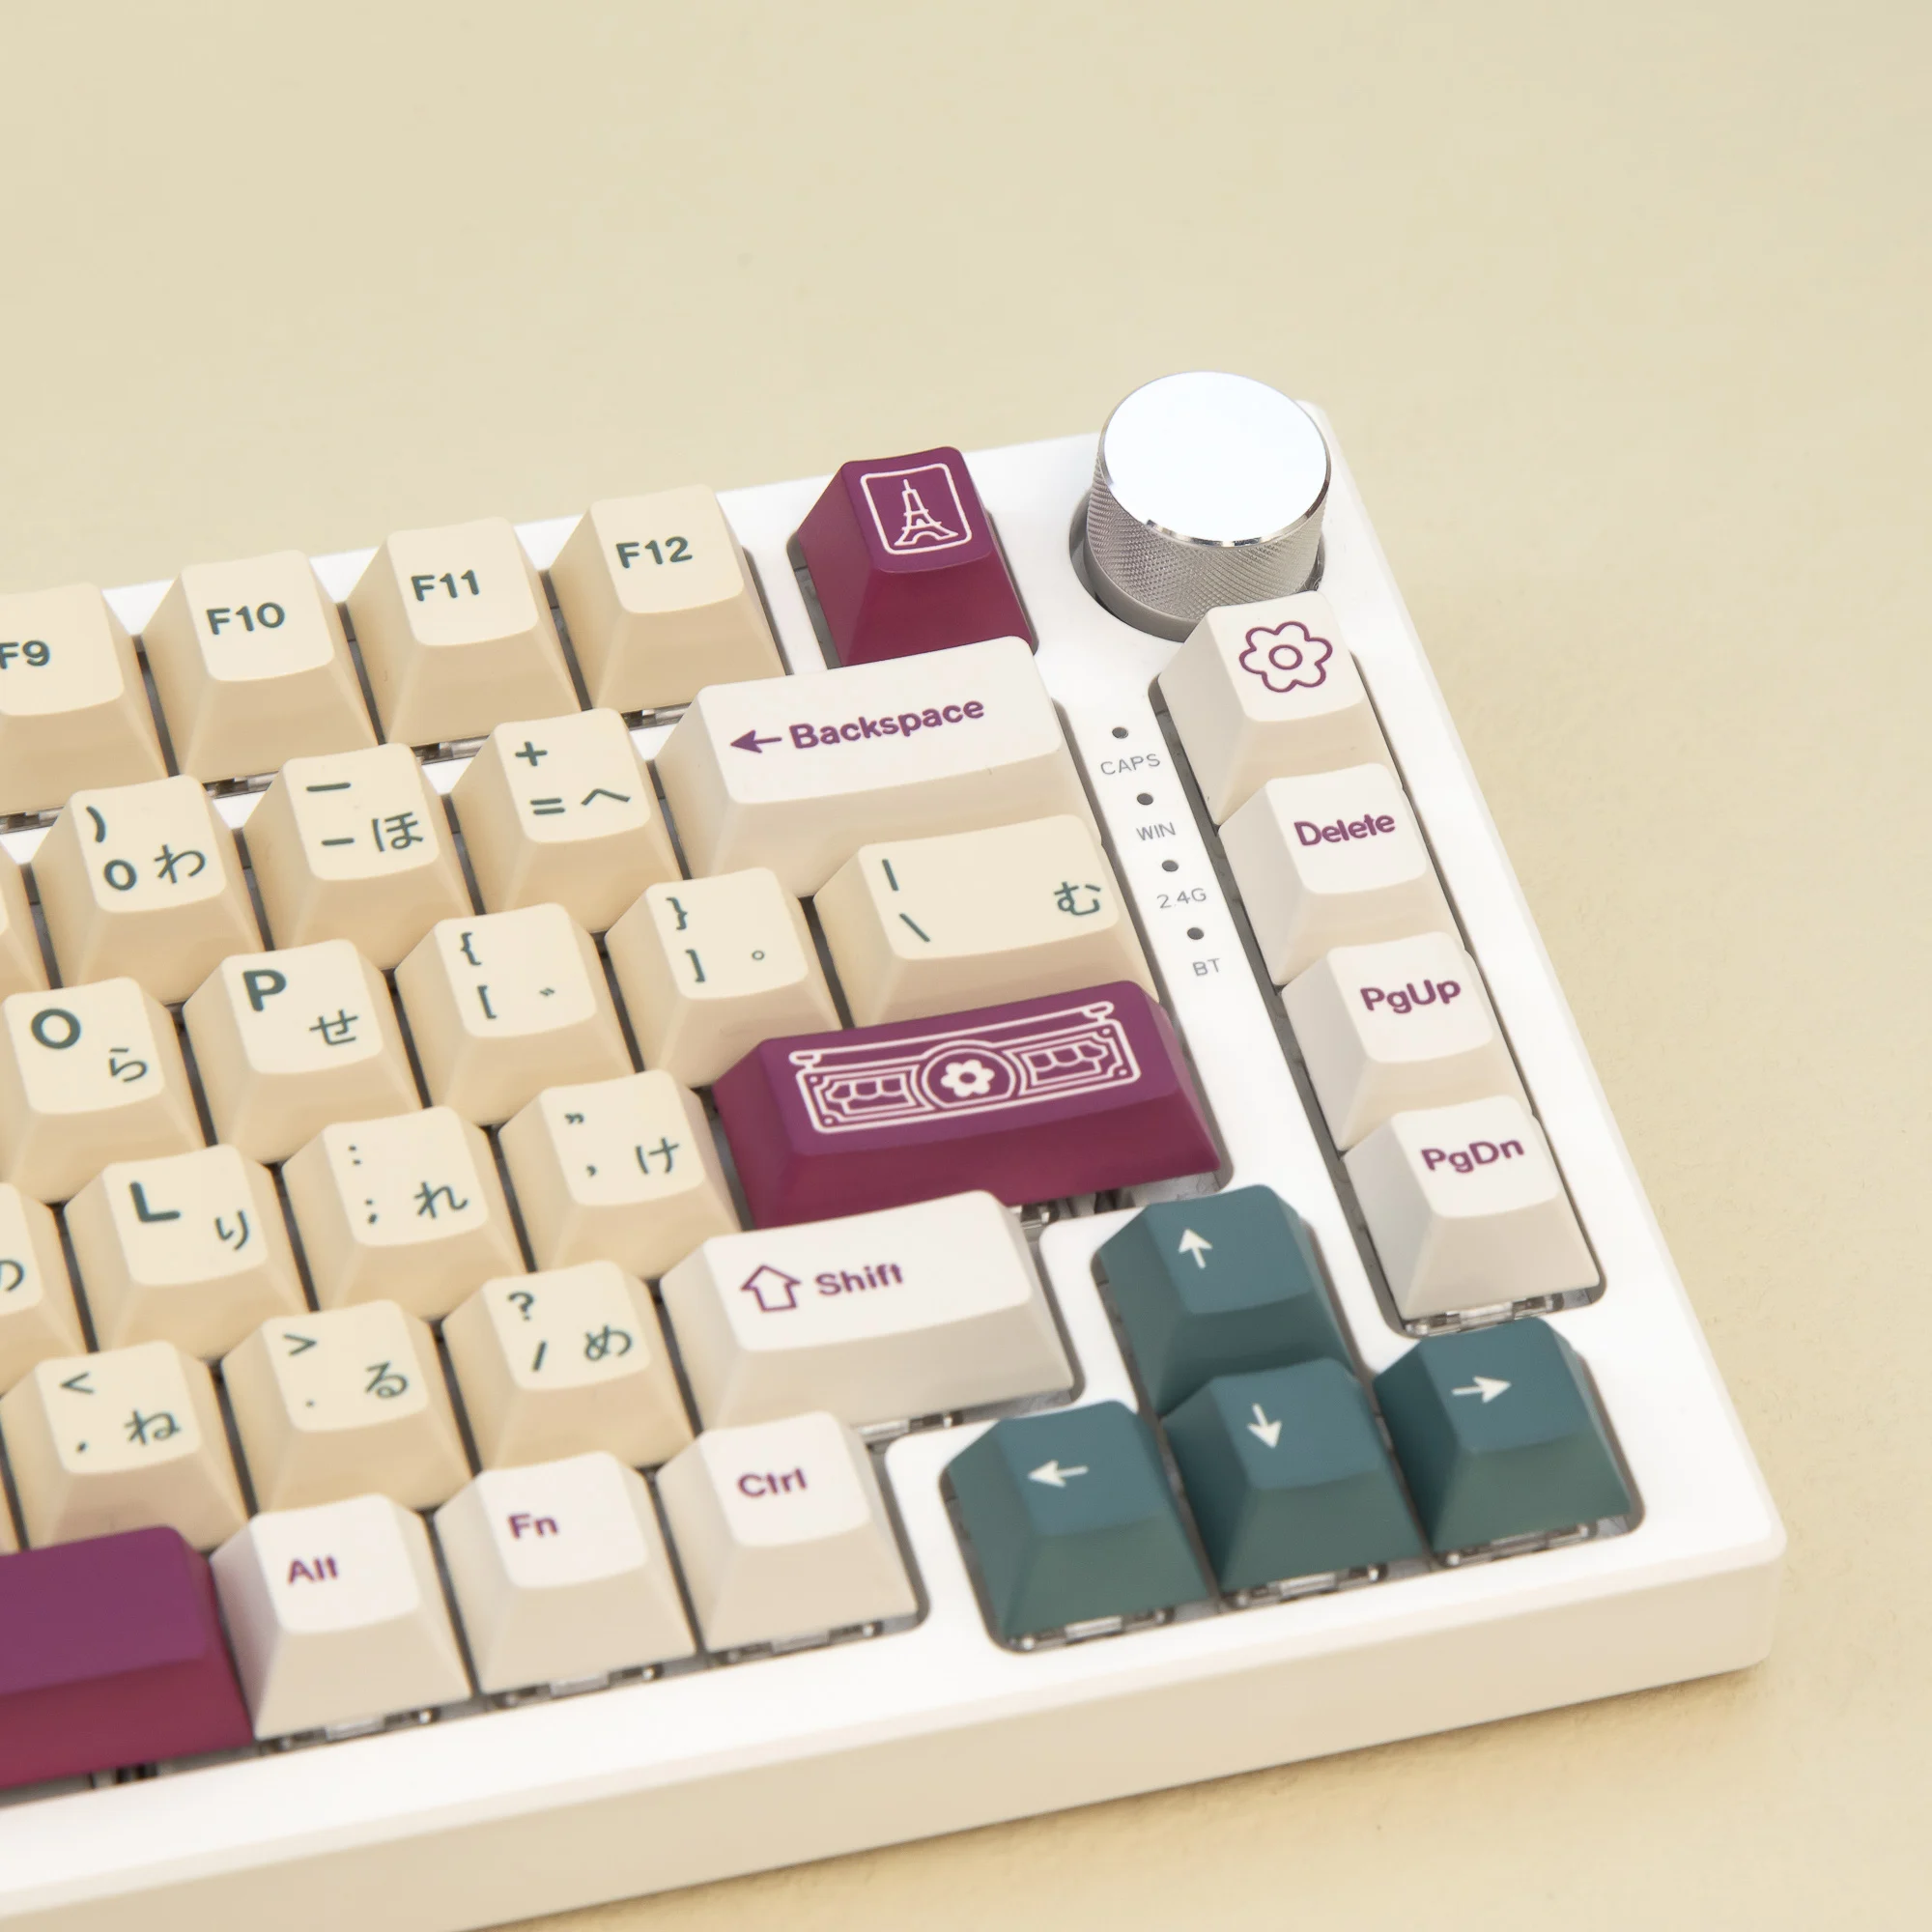 143 key GMK Florist Keycaps Japanese Keycap Cherry Profile PBT Dye Subbed Key Caps for Mechanical Keyboard With MX Switch